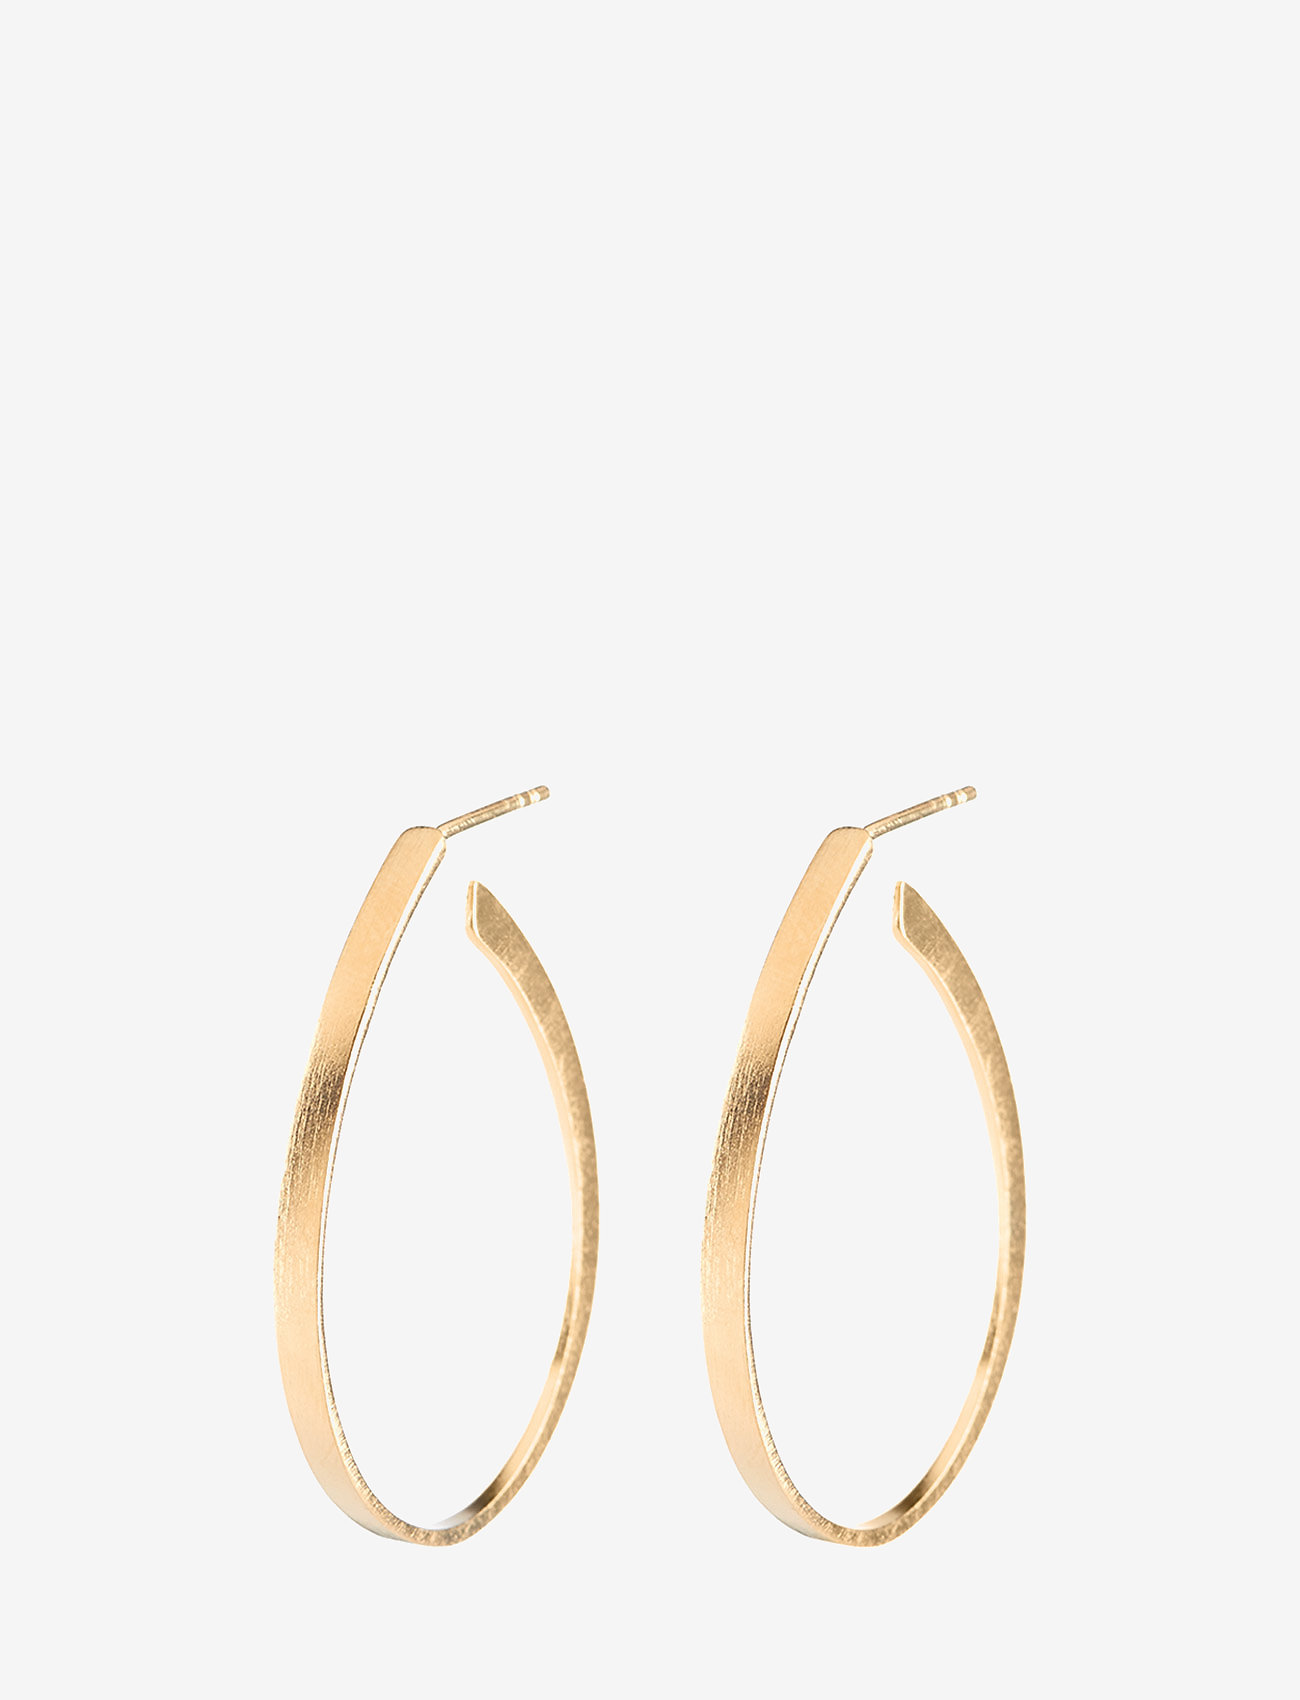 Pernille Corydon - Oval Creoles size 35 mm - statement earrings - gold plated - 0